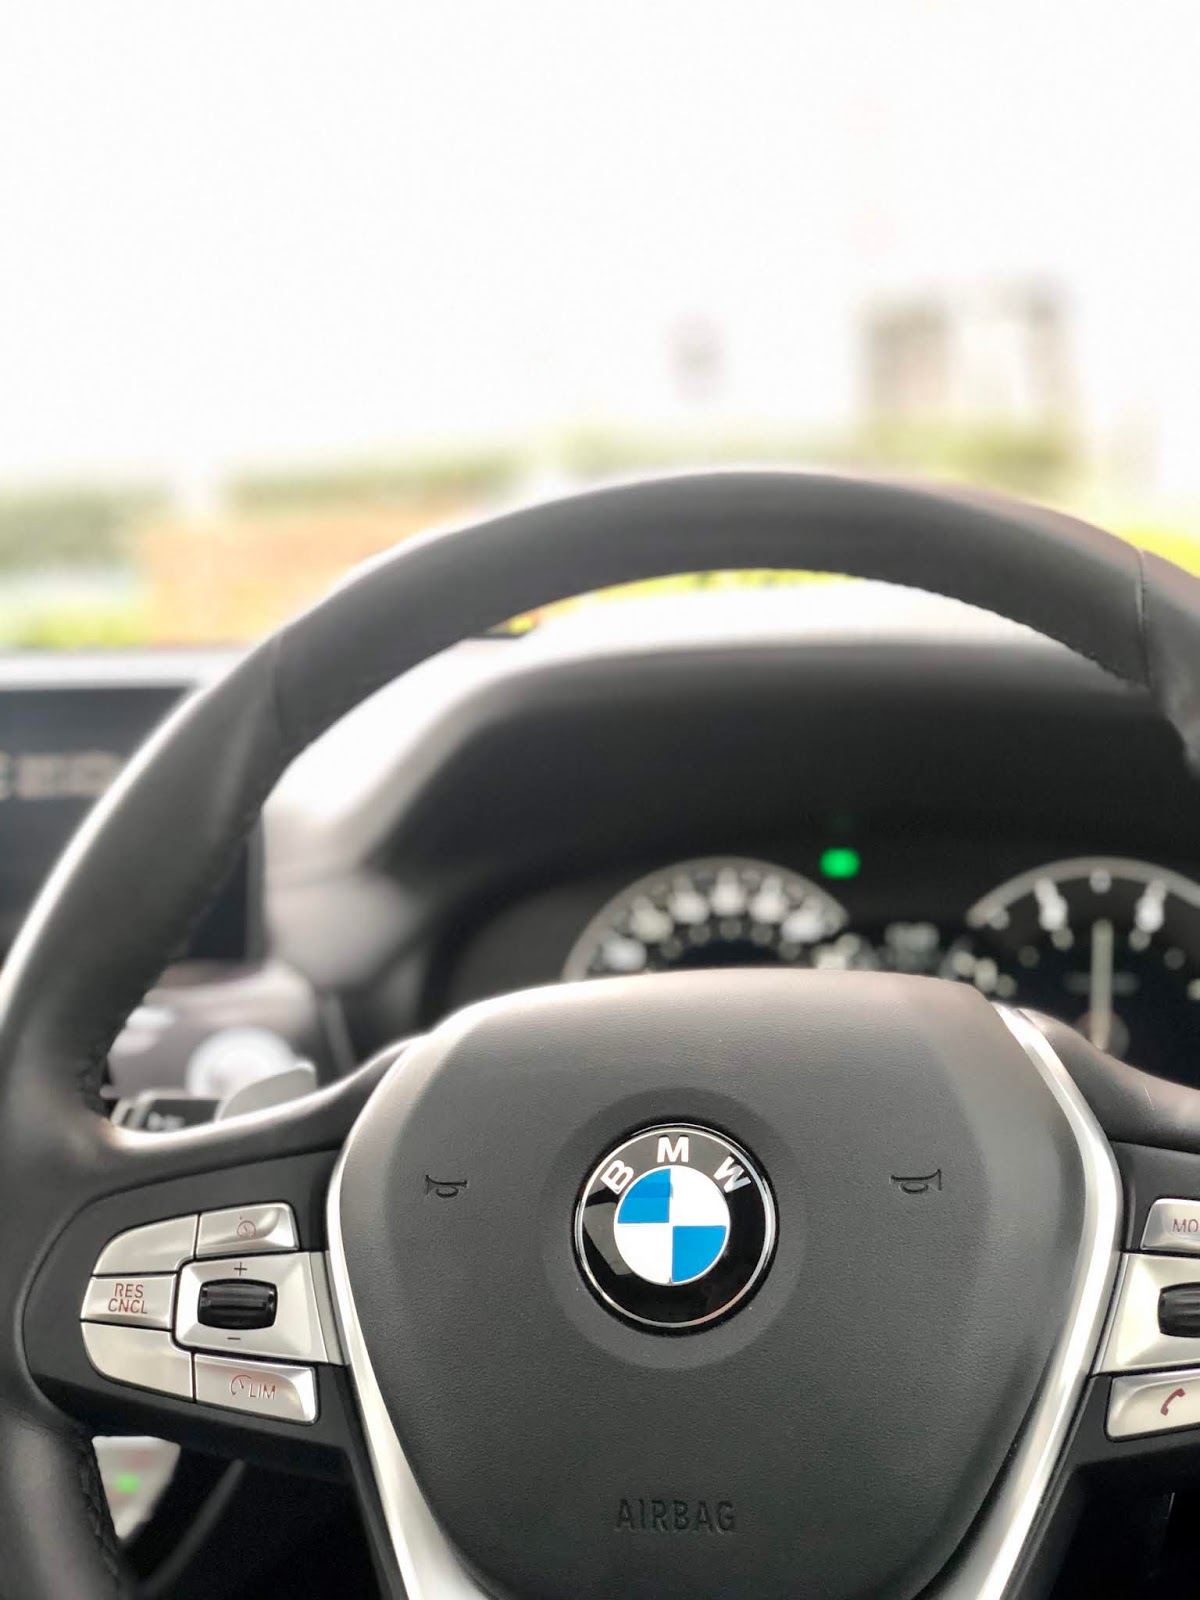 The BMW X3 xDrive20d steering